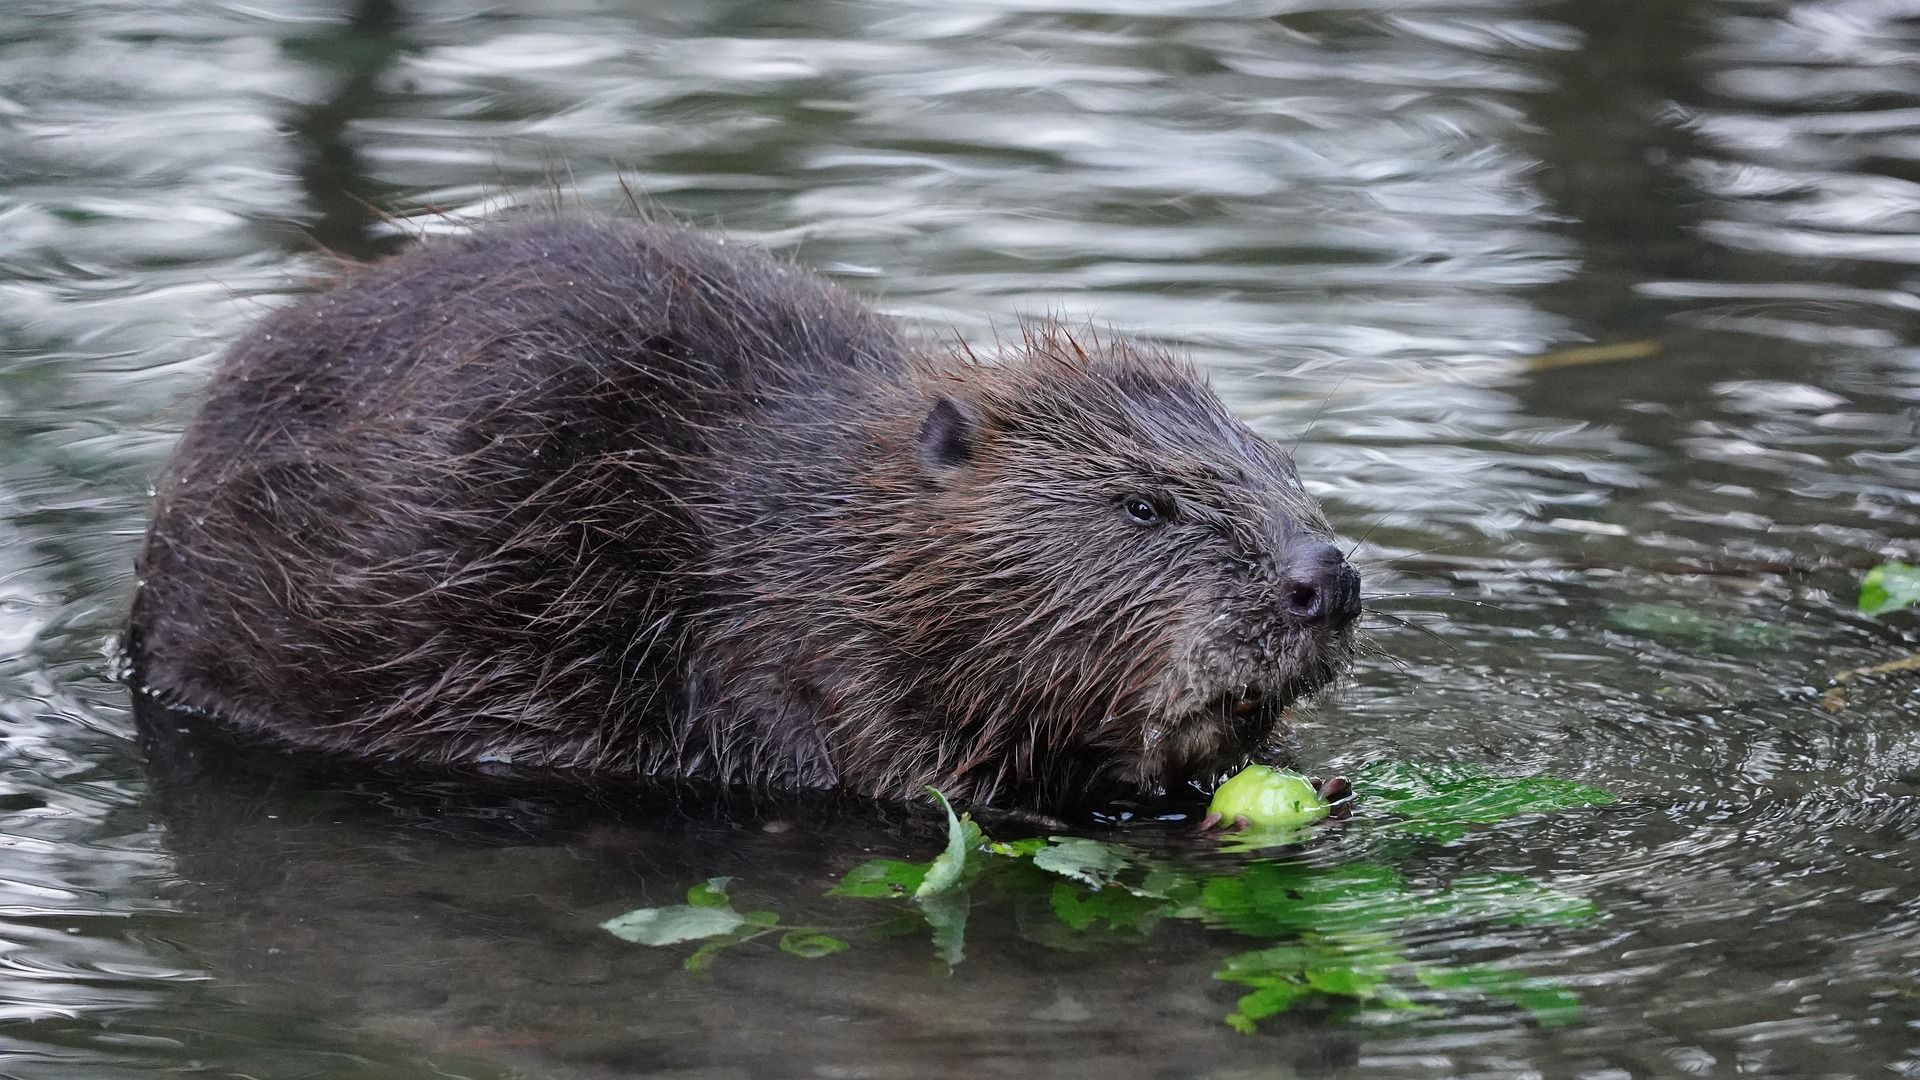 An image of a Eurasian Beaver eating a piece of fruit in a body of water.